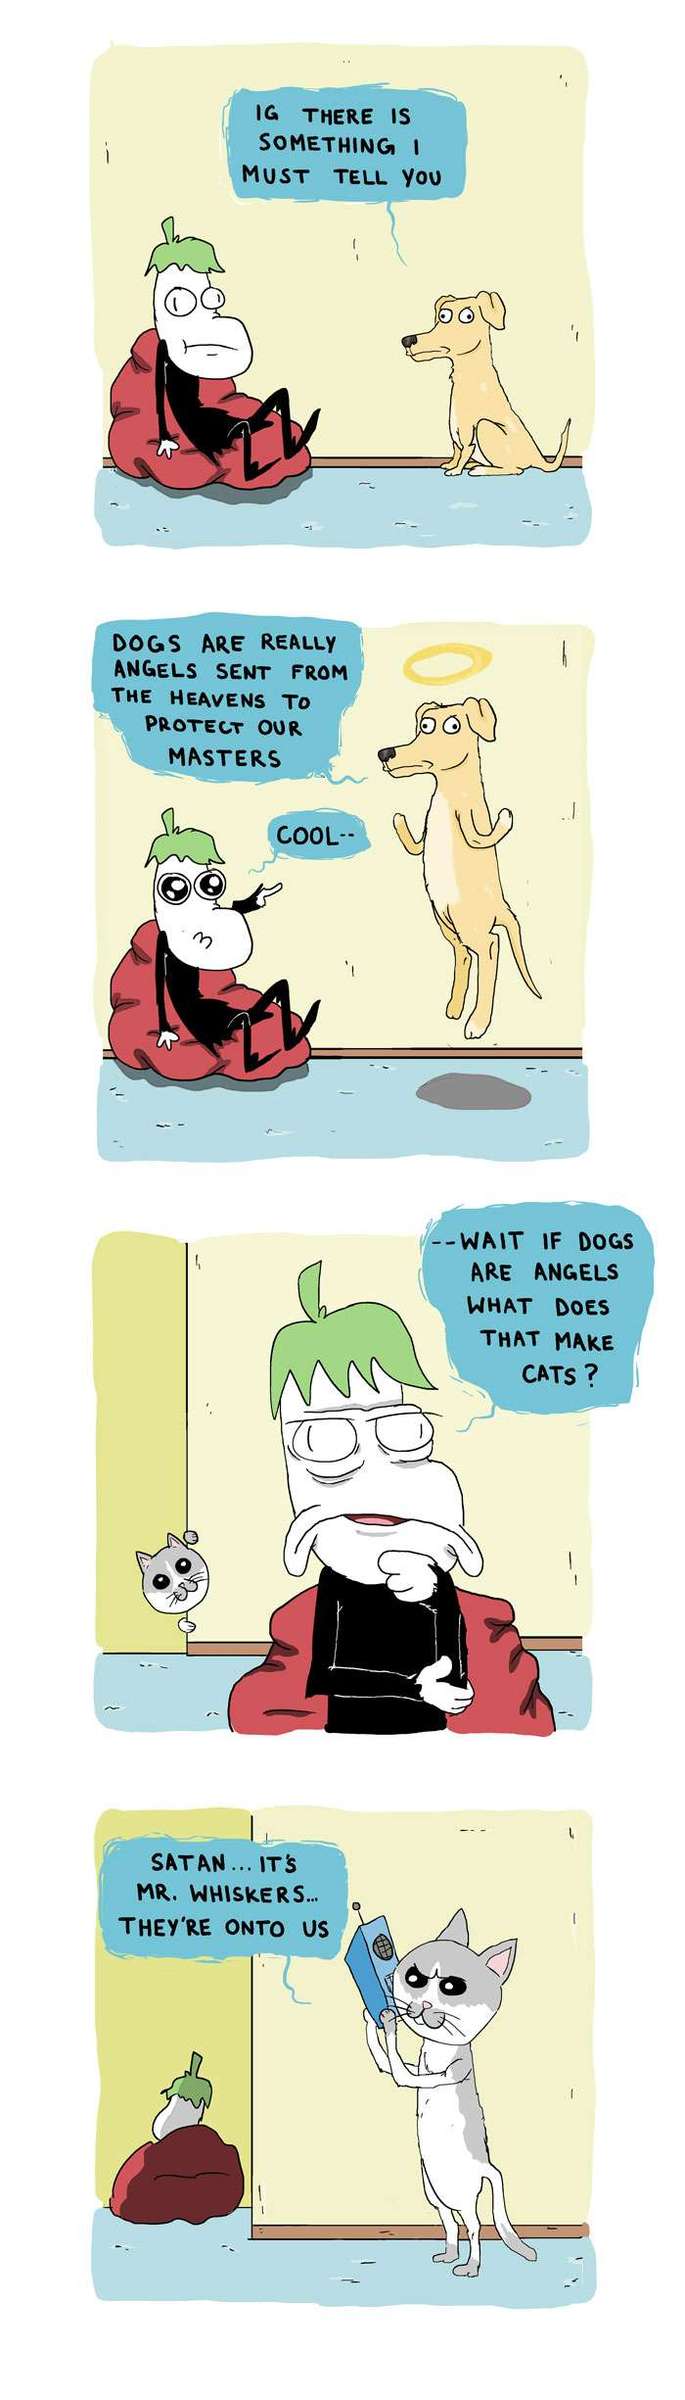 cats are undercover agents of satan - meme